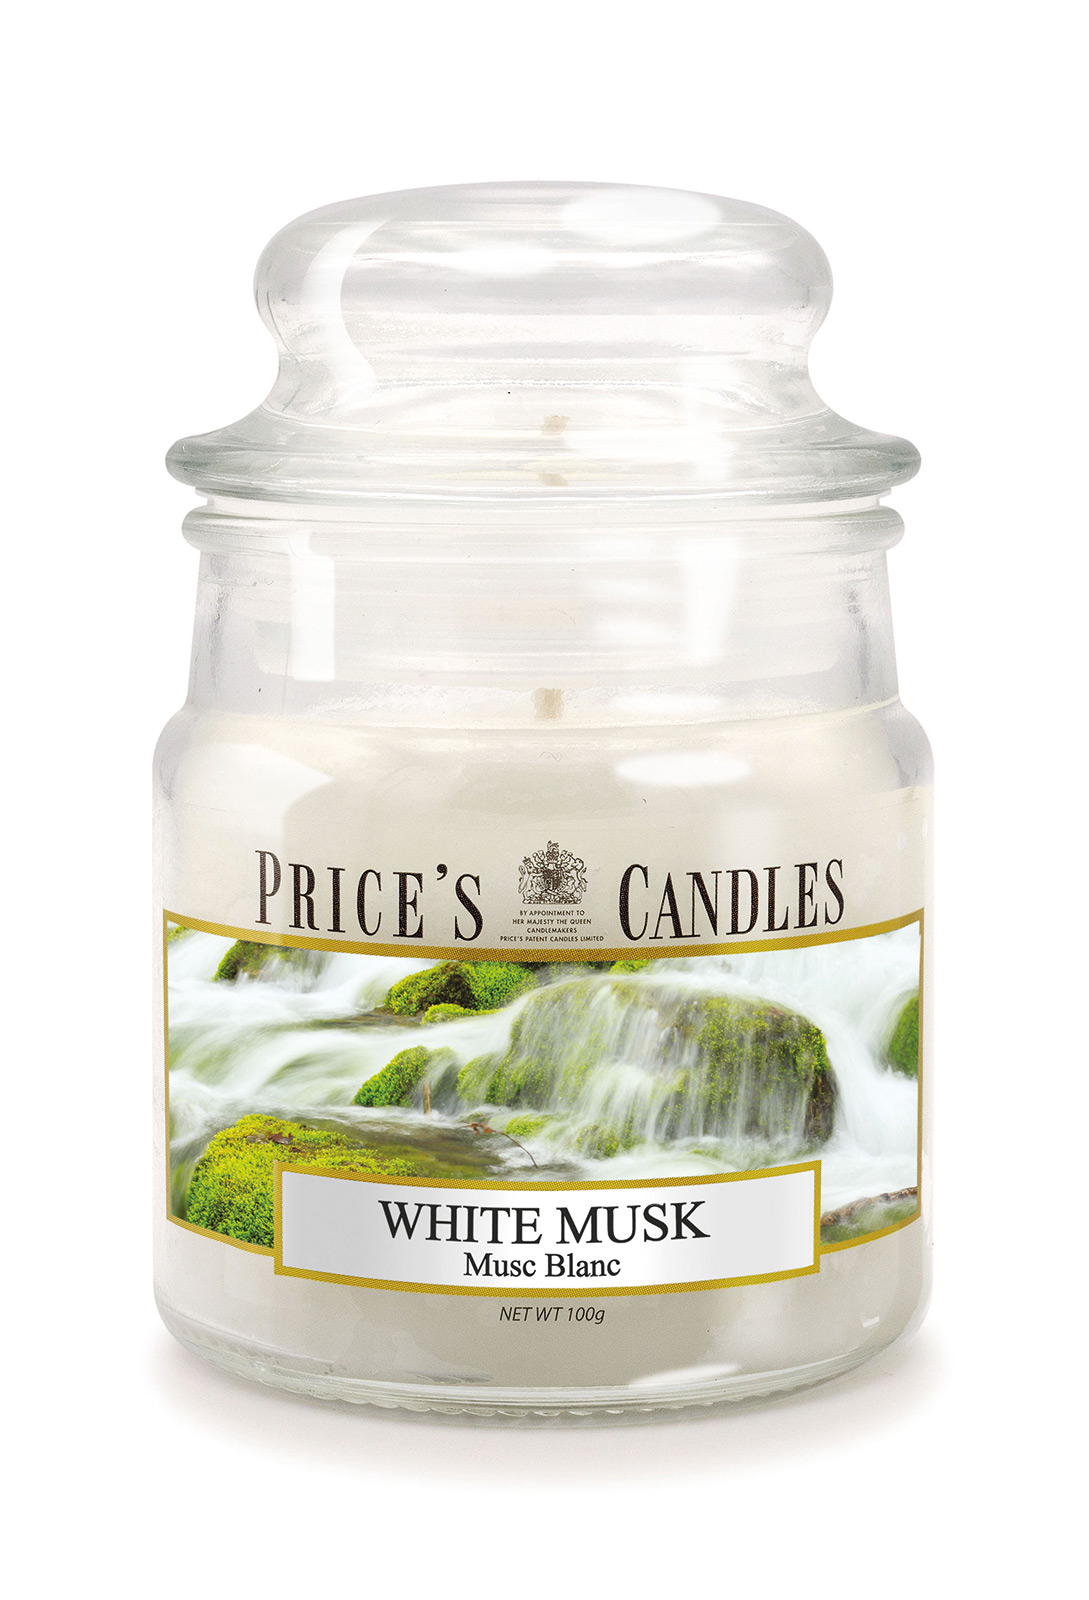 Prices Candle "White Musk" 100g 